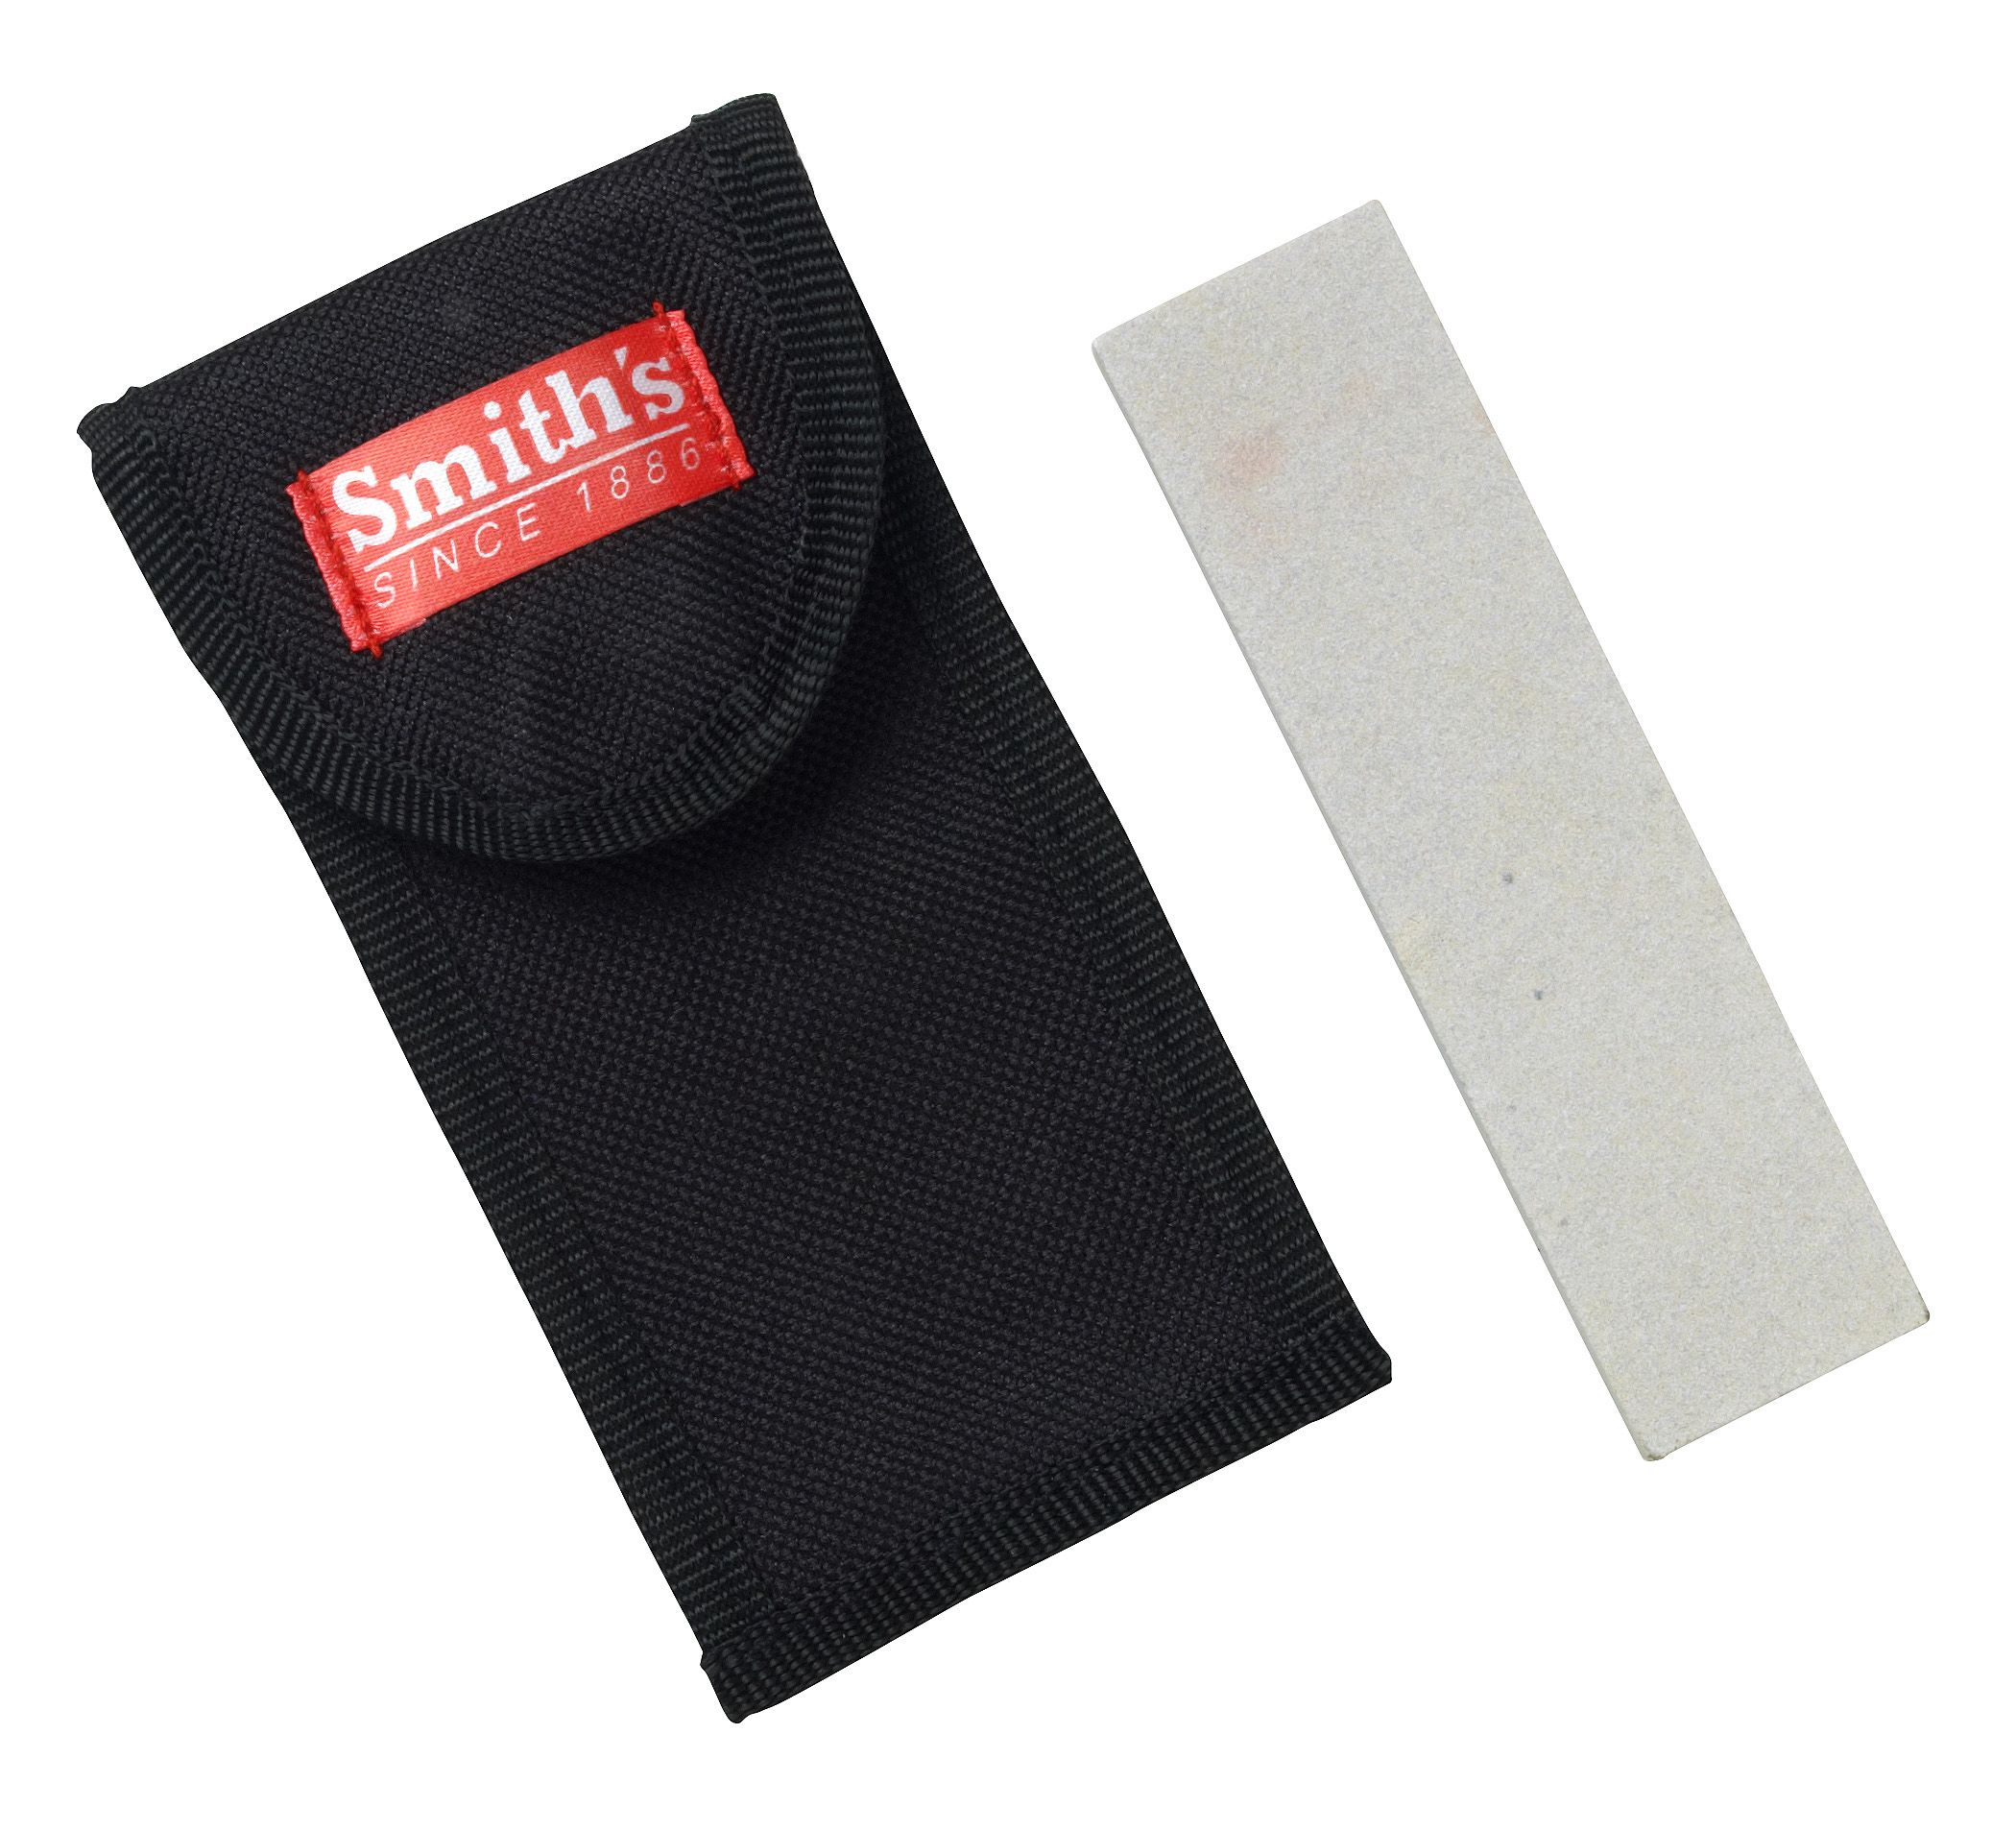 Smith's Sharpener and Survival Tool